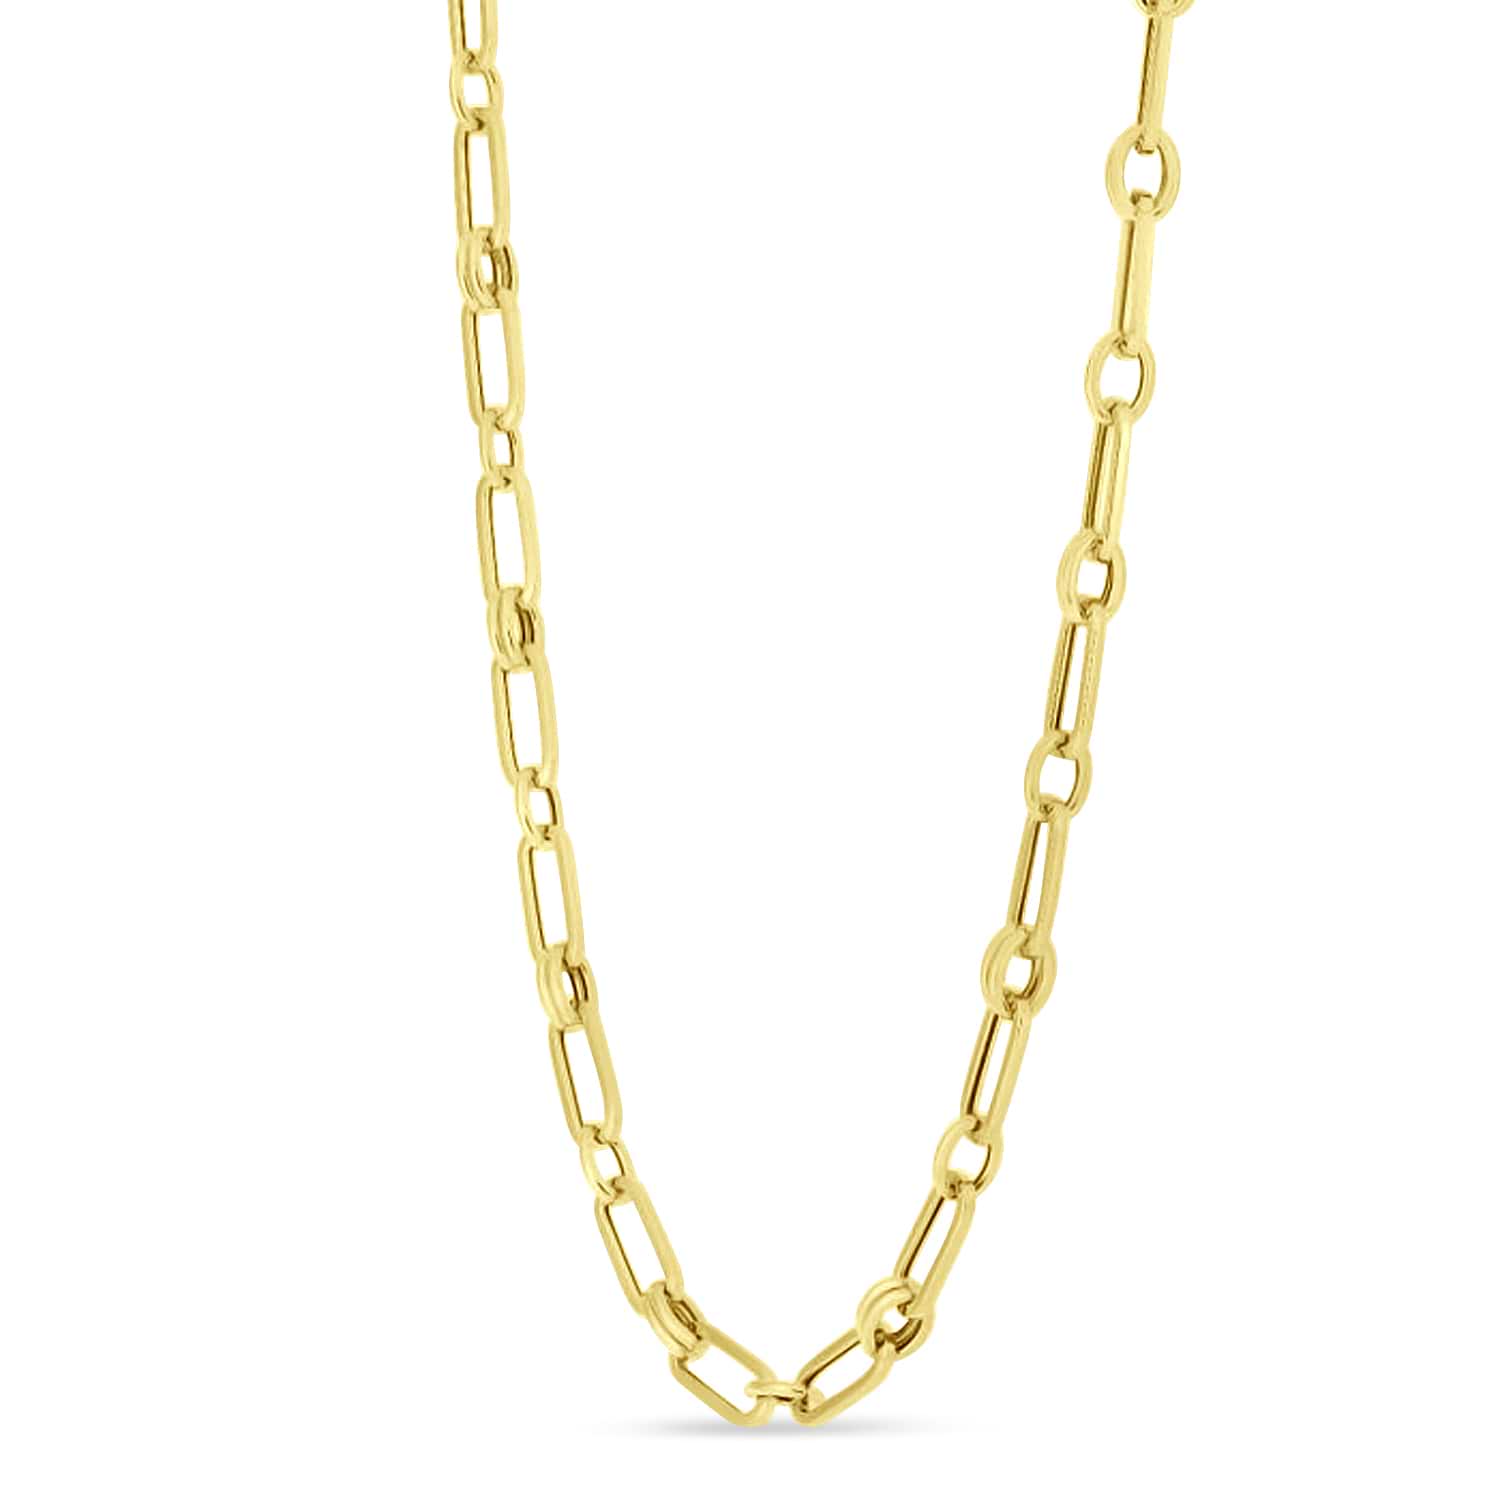 Paperclip Rondel Link Chain Necklace 14k Yellow Gold